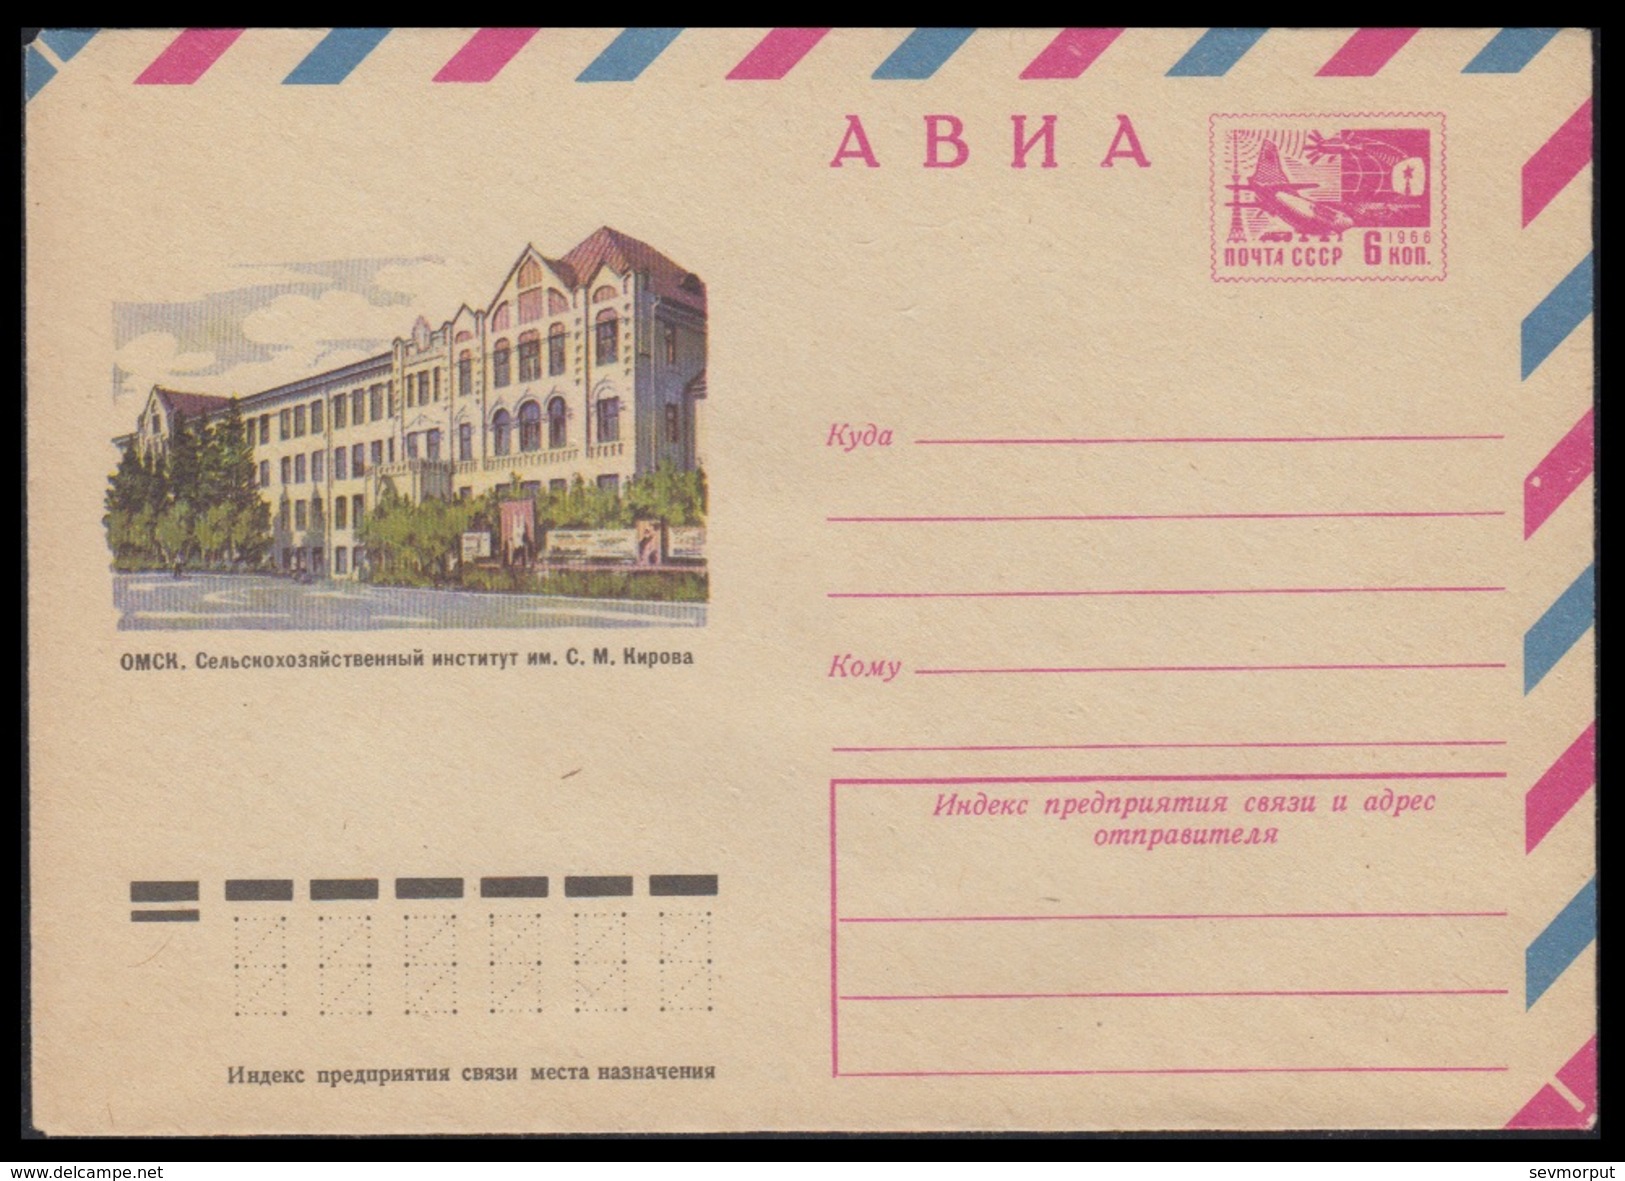 10020 RUSSIA 1974 ENTIER COVER Mint OMSK KIROV INSTITUTE AGRICULTURE AGRICOLE EDUCATION 74-646 - 1970-79